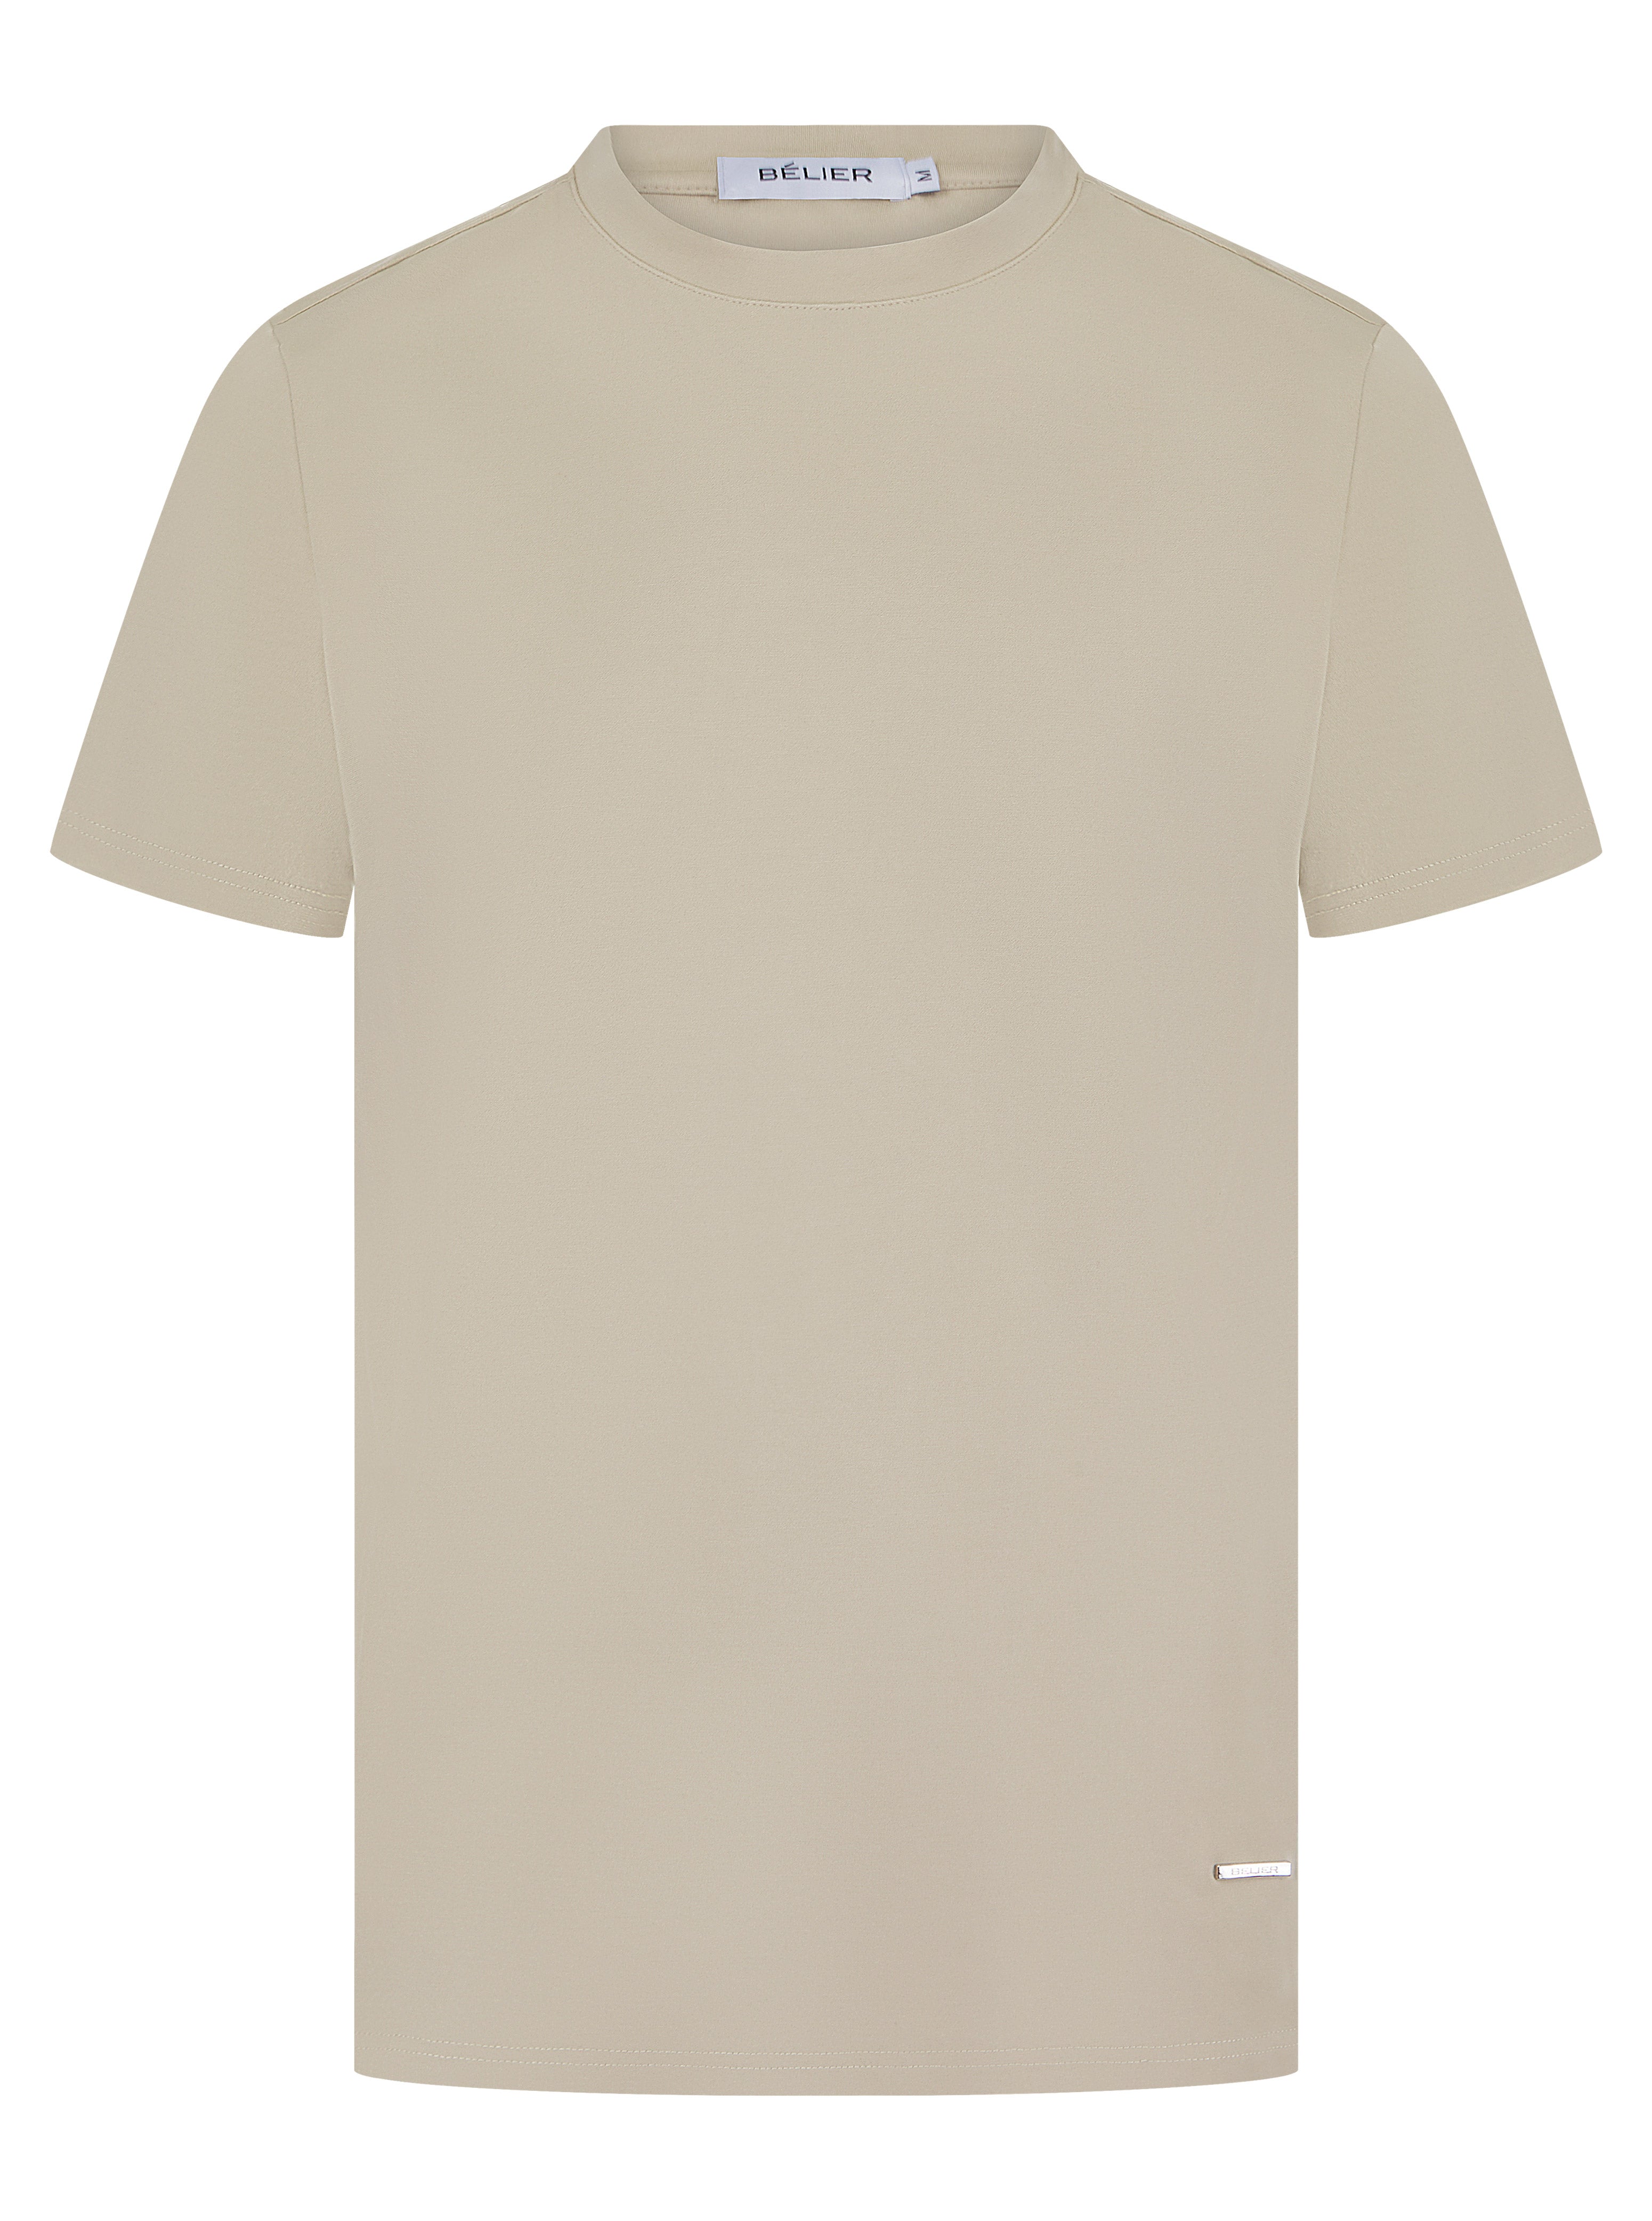 Load image into Gallery viewer, Belier Premium Tee Taupe
